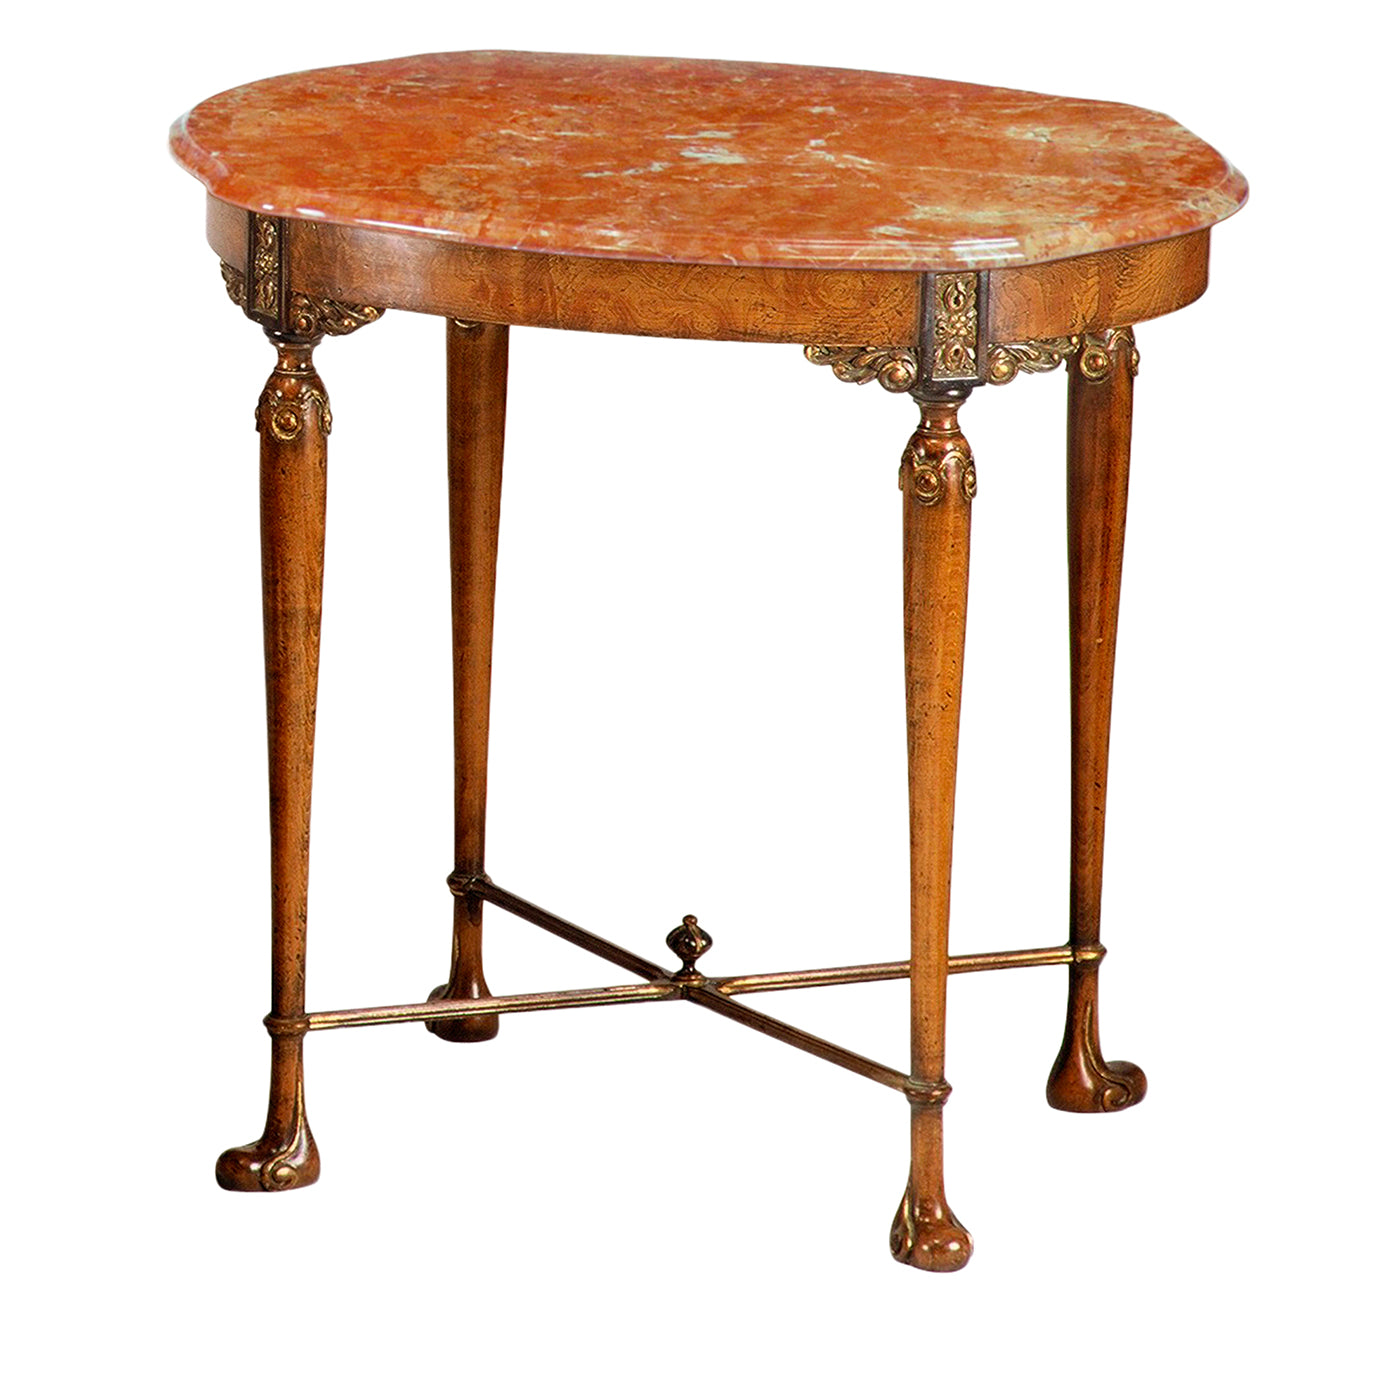 Victorian-Style Breccia Pernice & Beech Side Table - Main view